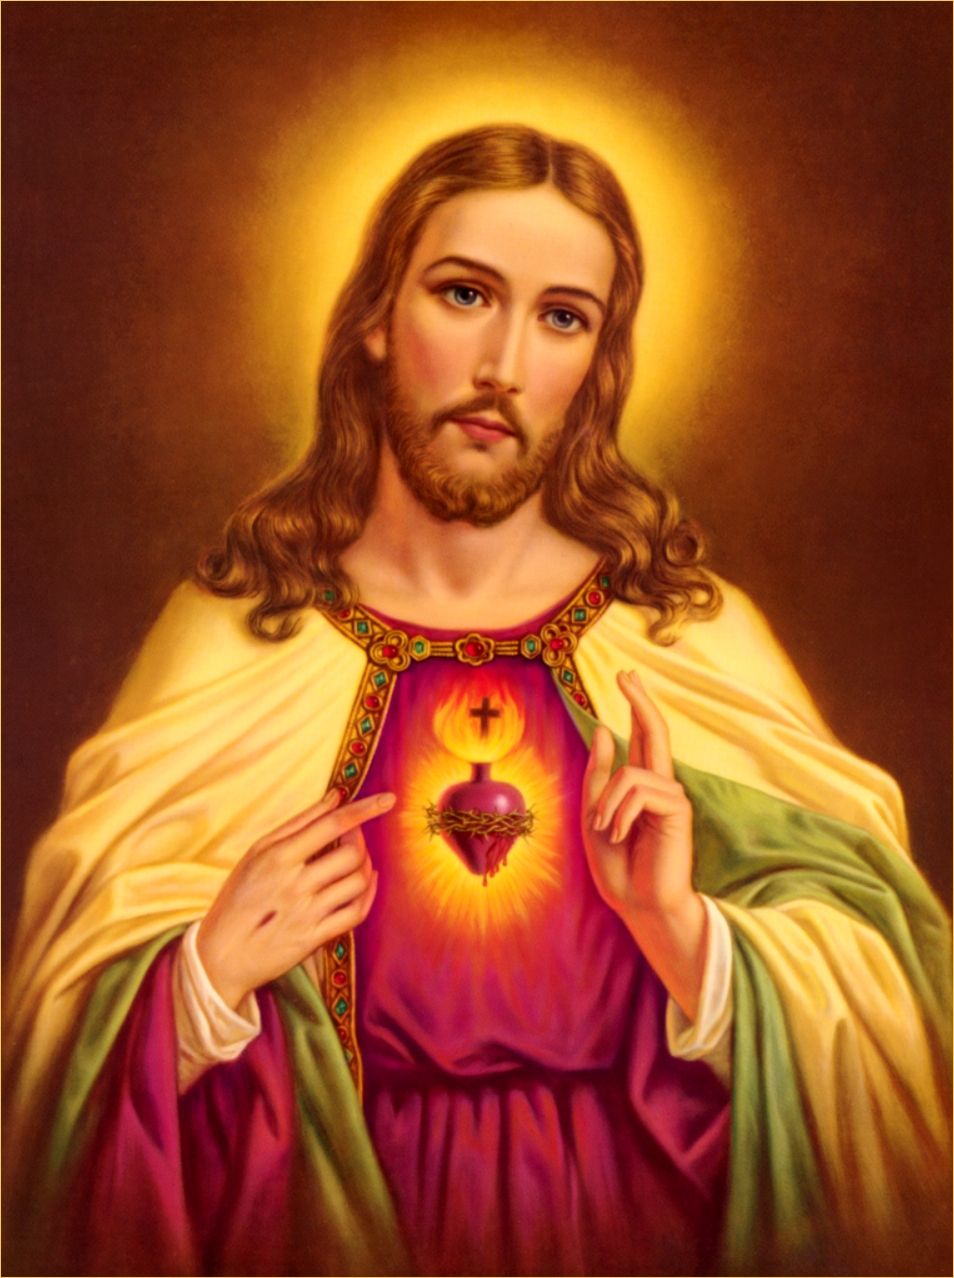 Pack 5 Hot 3D Huge Mural The Sacred Heart of Jesus Mercy Light and The  Bedroom Living Room Decorative Wallpaper A3 Size 12 in x 18 inch Paper  Print  Religious posters